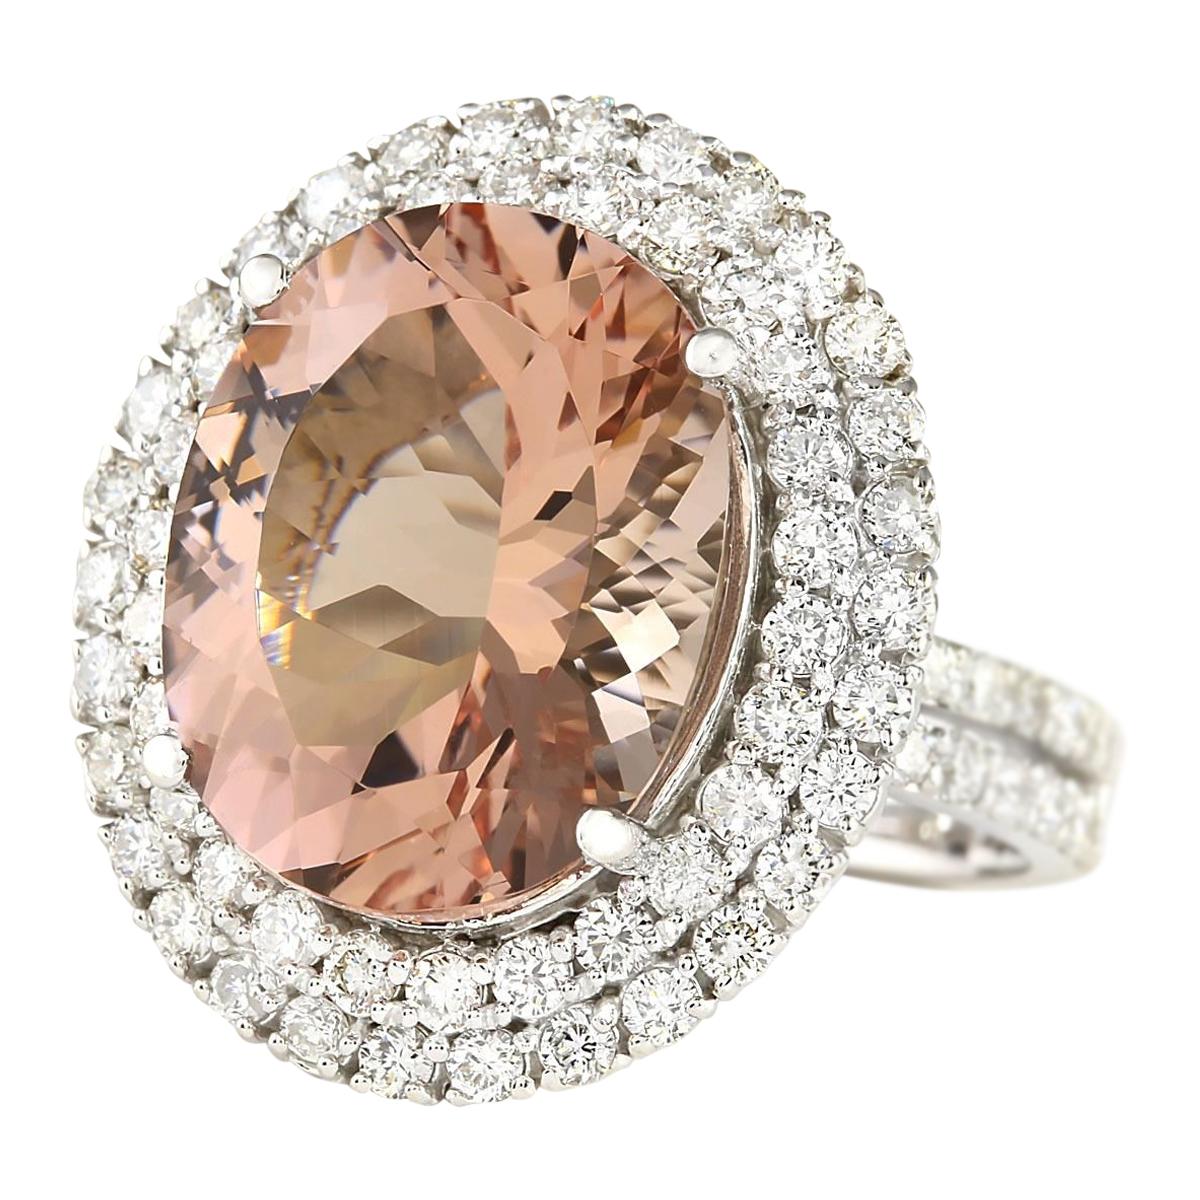 Introducing our exquisite 11.53 Carat Morganite Ring, crafted in luxurious 14K White Gold. This captivating piece is stamped with authenticity, featuring a total ring weight of 16.2 grams. The centerpiece is a stunning morganite gemstone weighing